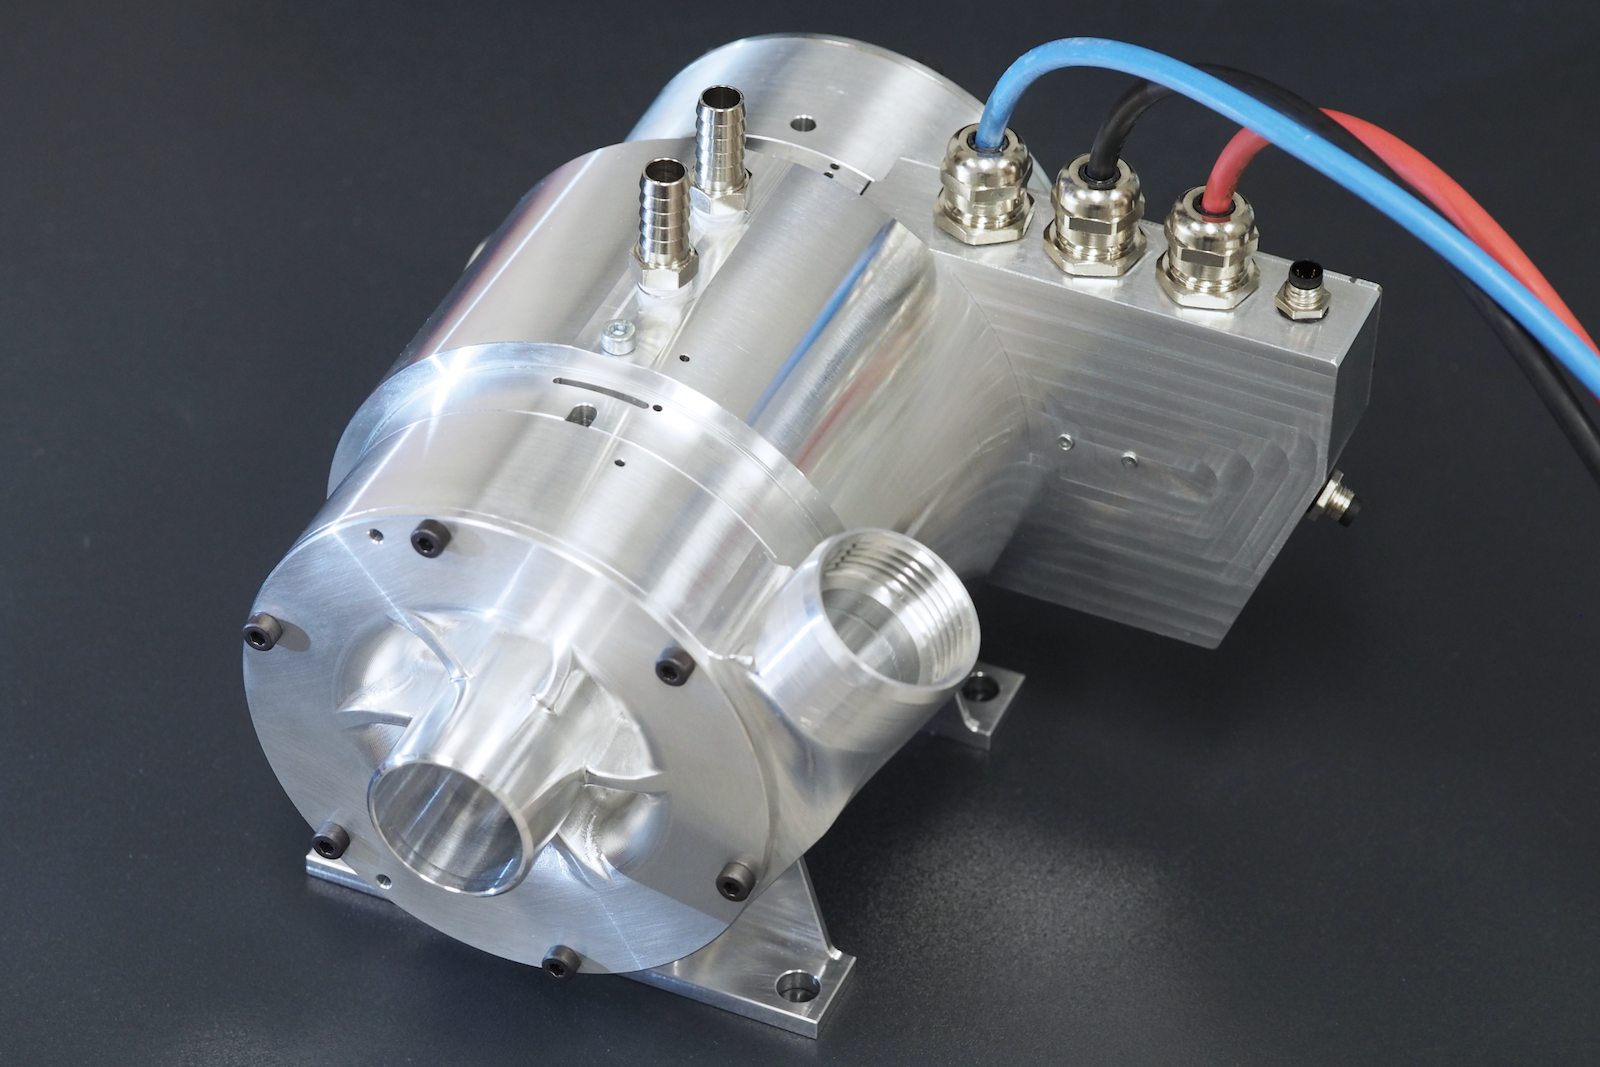 Development of a Micro Turbocharger for the Supply of Clean Air to Hydrogen Fuel Cell Systems